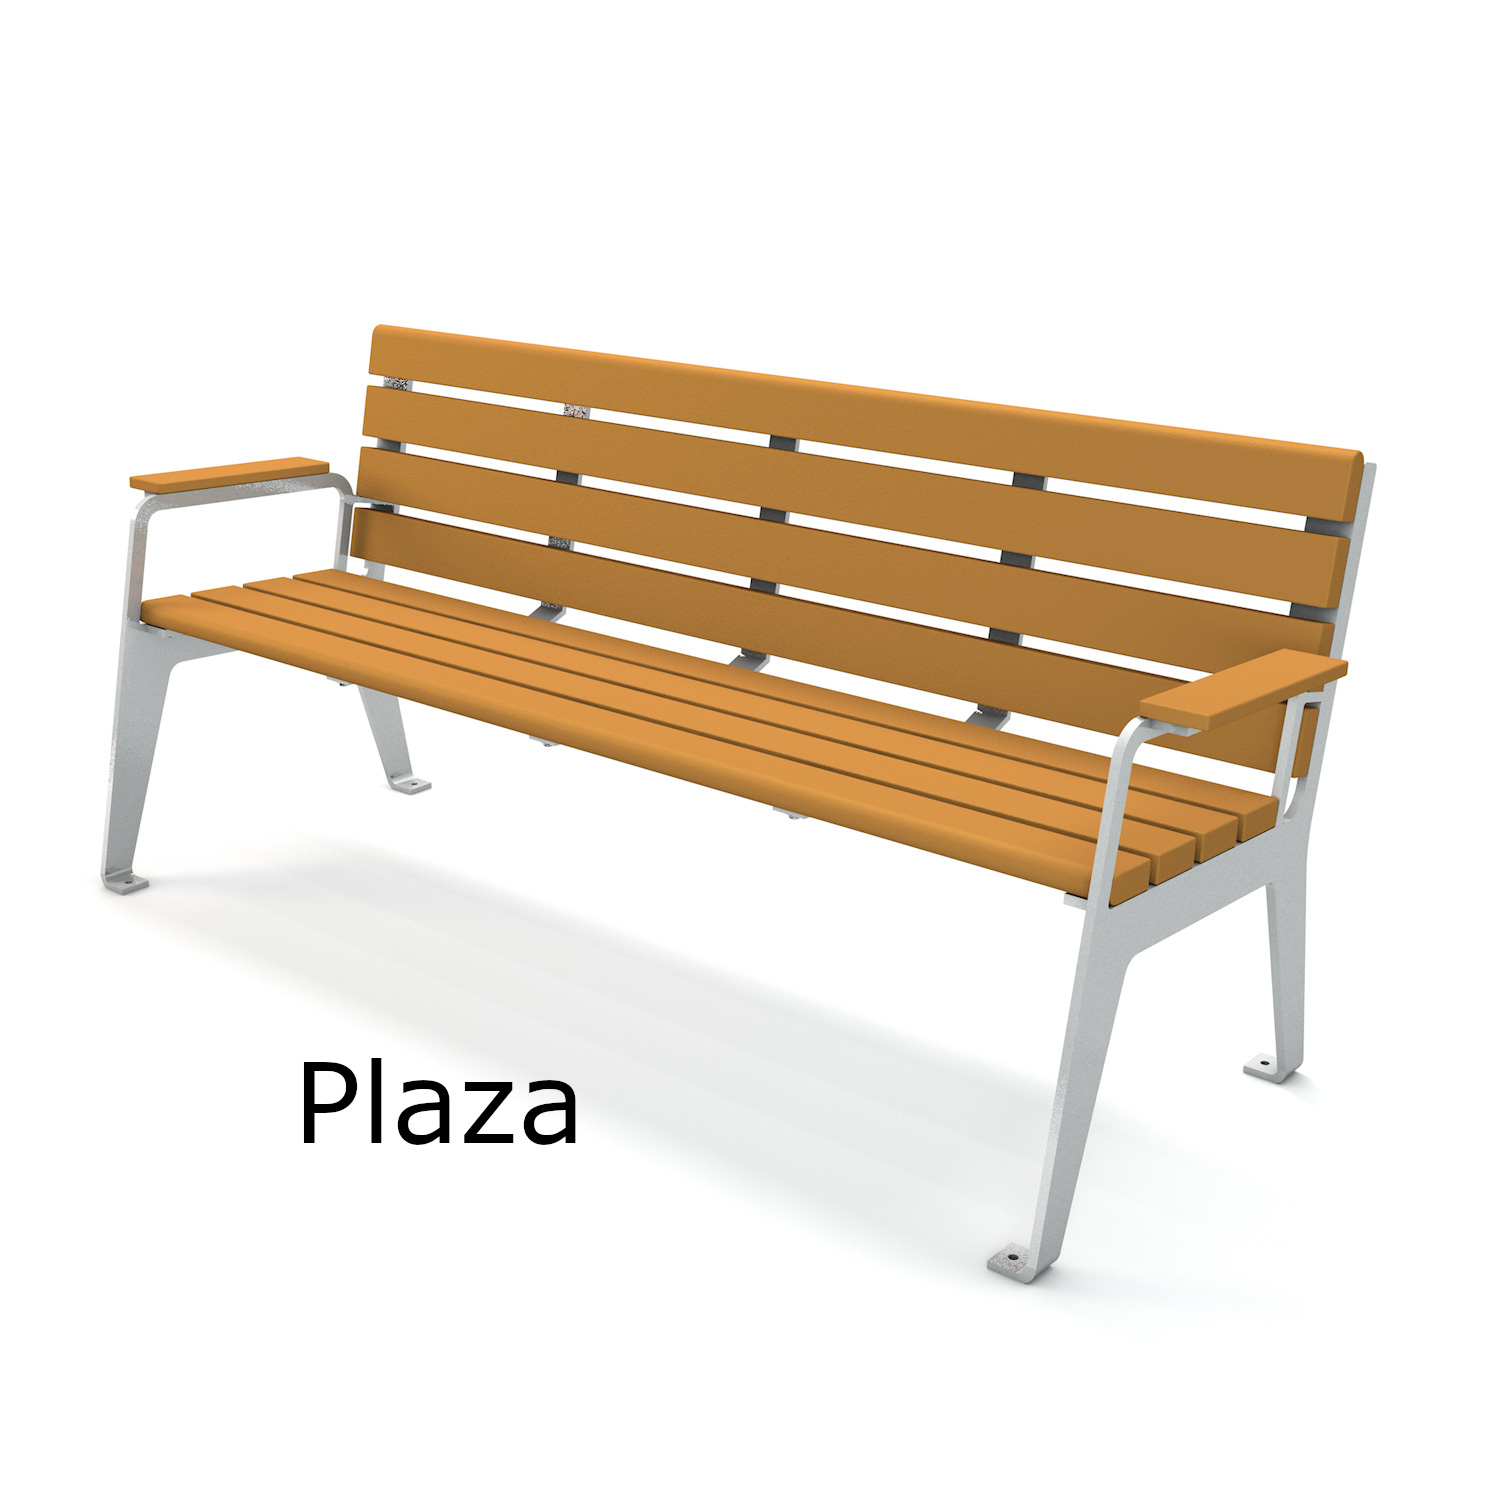 Plaza Recycled Plastic Lumber Park Bench